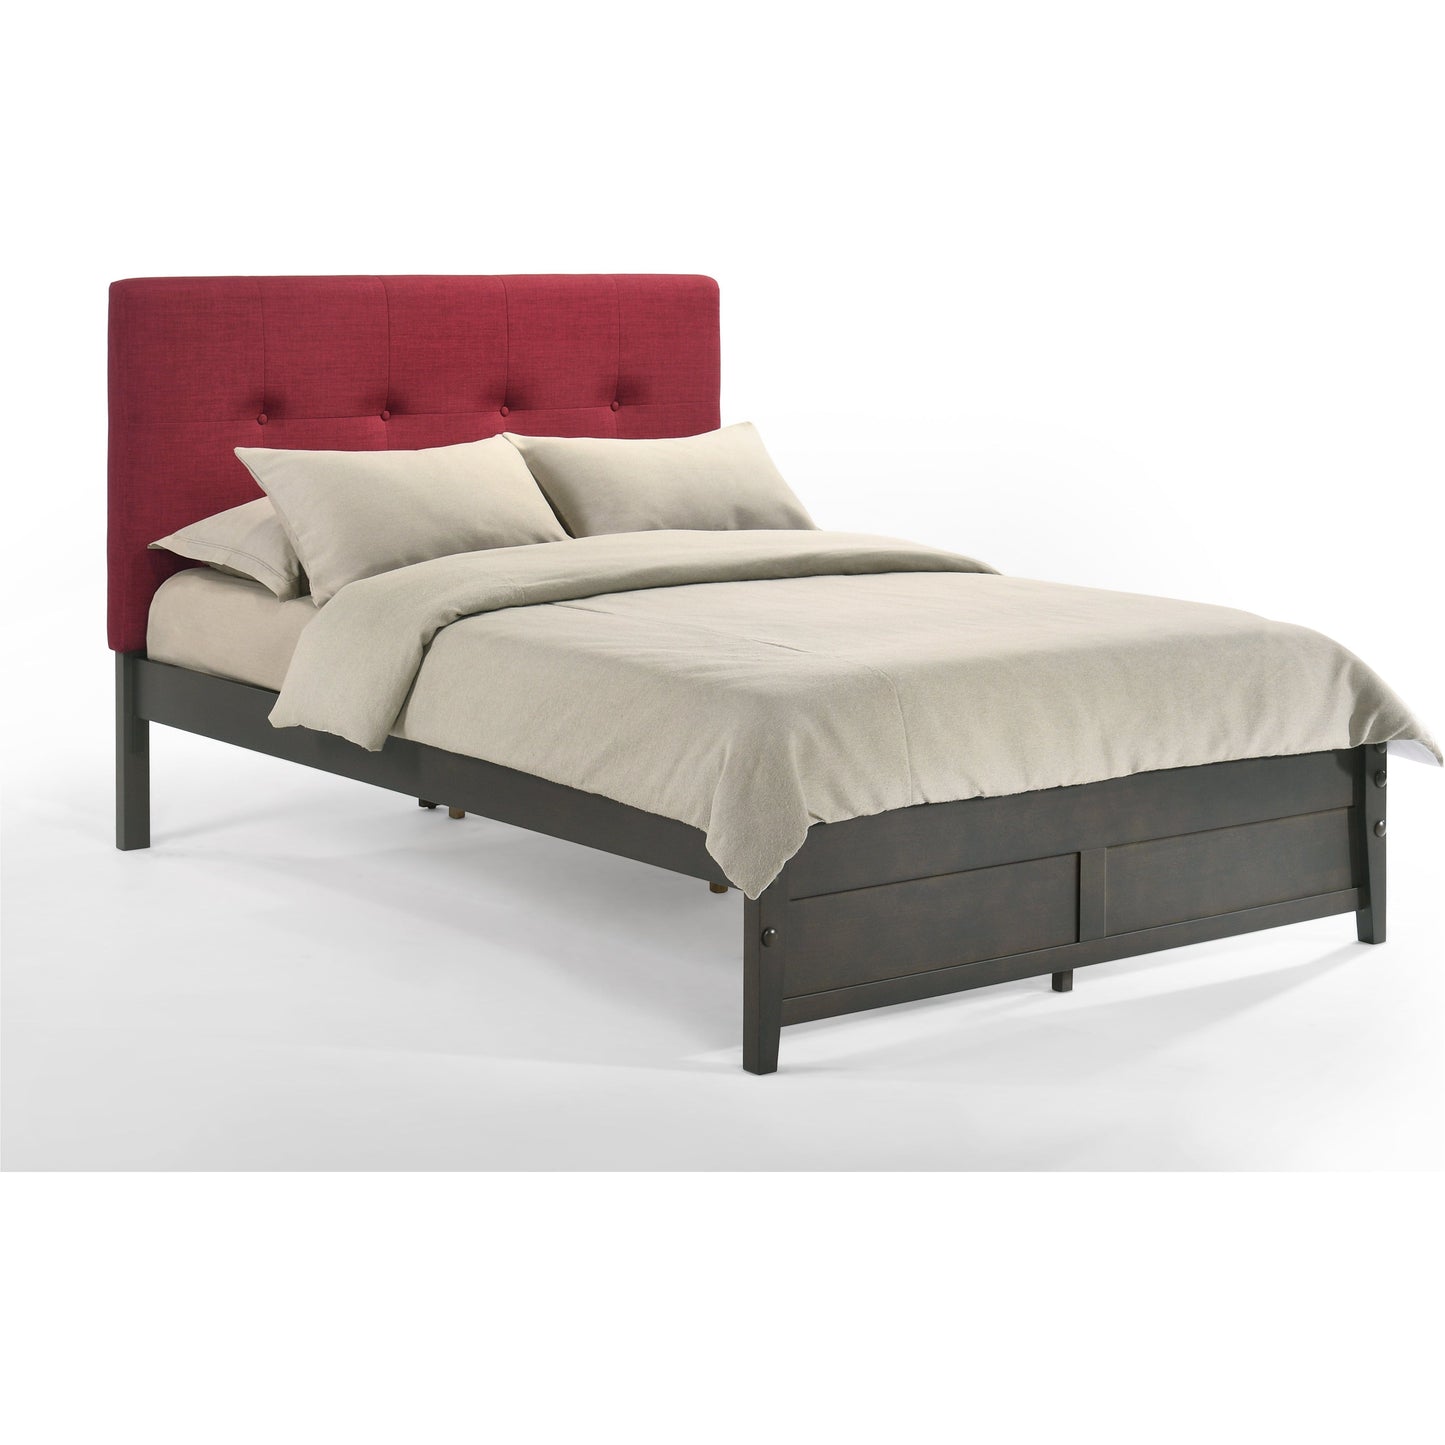 The Bedroom Emporium Paprika Twin Bed in Charcoal with Stonewash Finish Frame (K Series) PAP-PH-TWN-CC-COM-K-STW